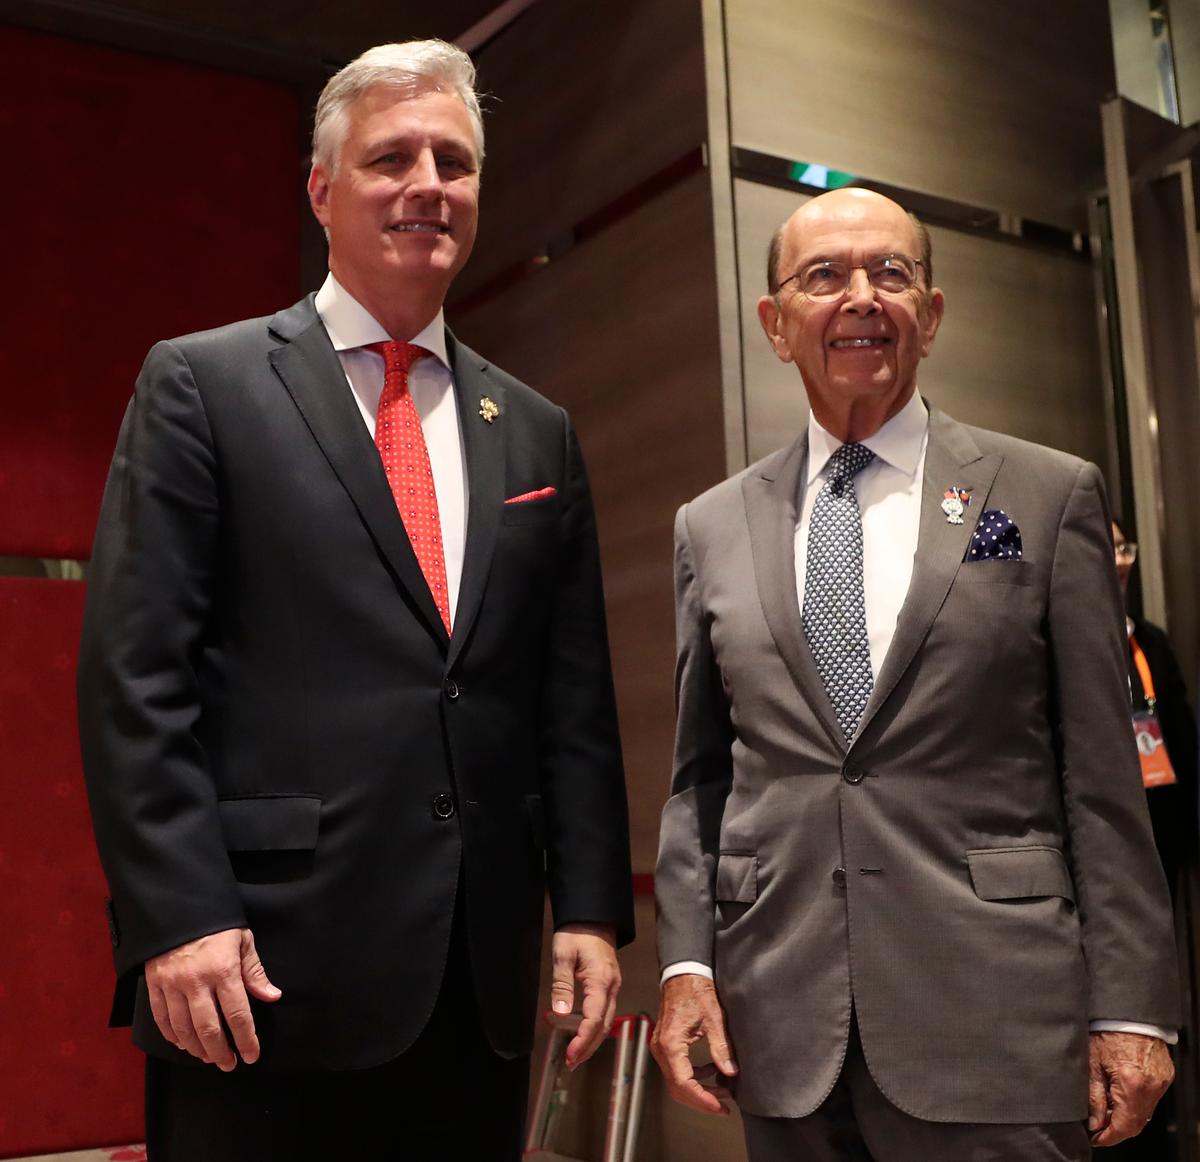 National Security Adviser Robert O'Brien (L) and Commerce Secretary Wilbur Ross arrive for the bilateral meeting with Japanese Prime Minister Shinzo Abe at the Association of Southeast Asian Nations summit in Nonthaburi, Thailand, on Nov. 4, 2019. (Aijaz Rahi/AP Photo)